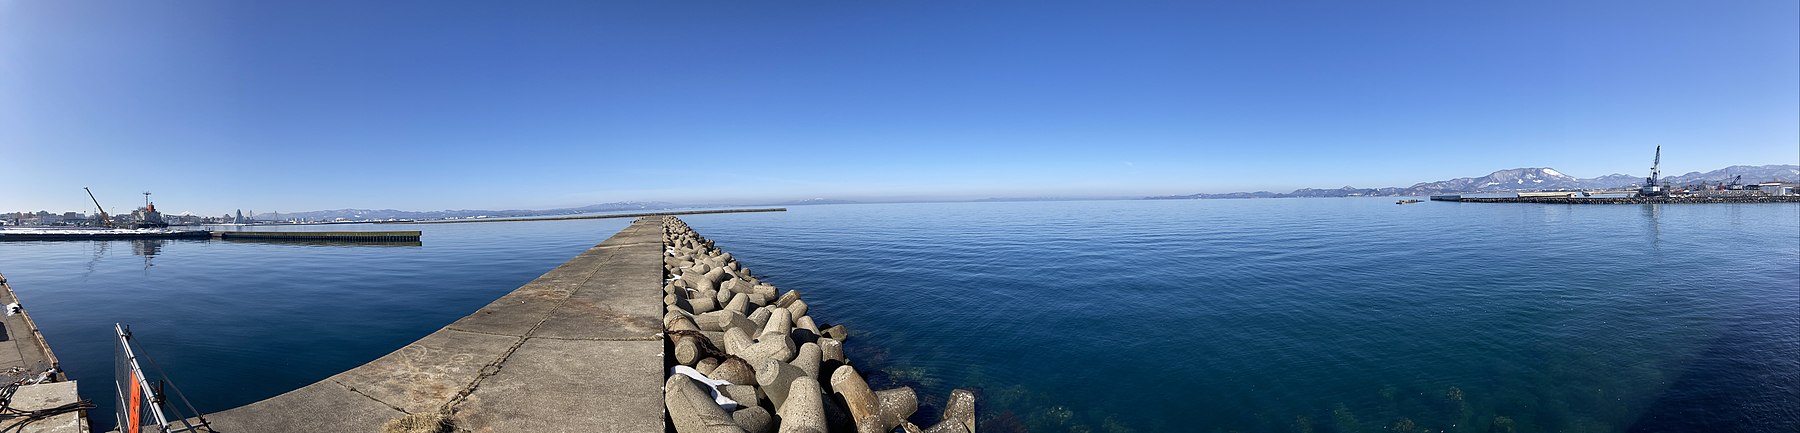 Panorama of Aomori Bay as it is seen from the mouth of the Tsutsumi River with central Aomori to the far-left, Tsugaru Peninsula at center-left, and Natsudomari Peninsula to the right.